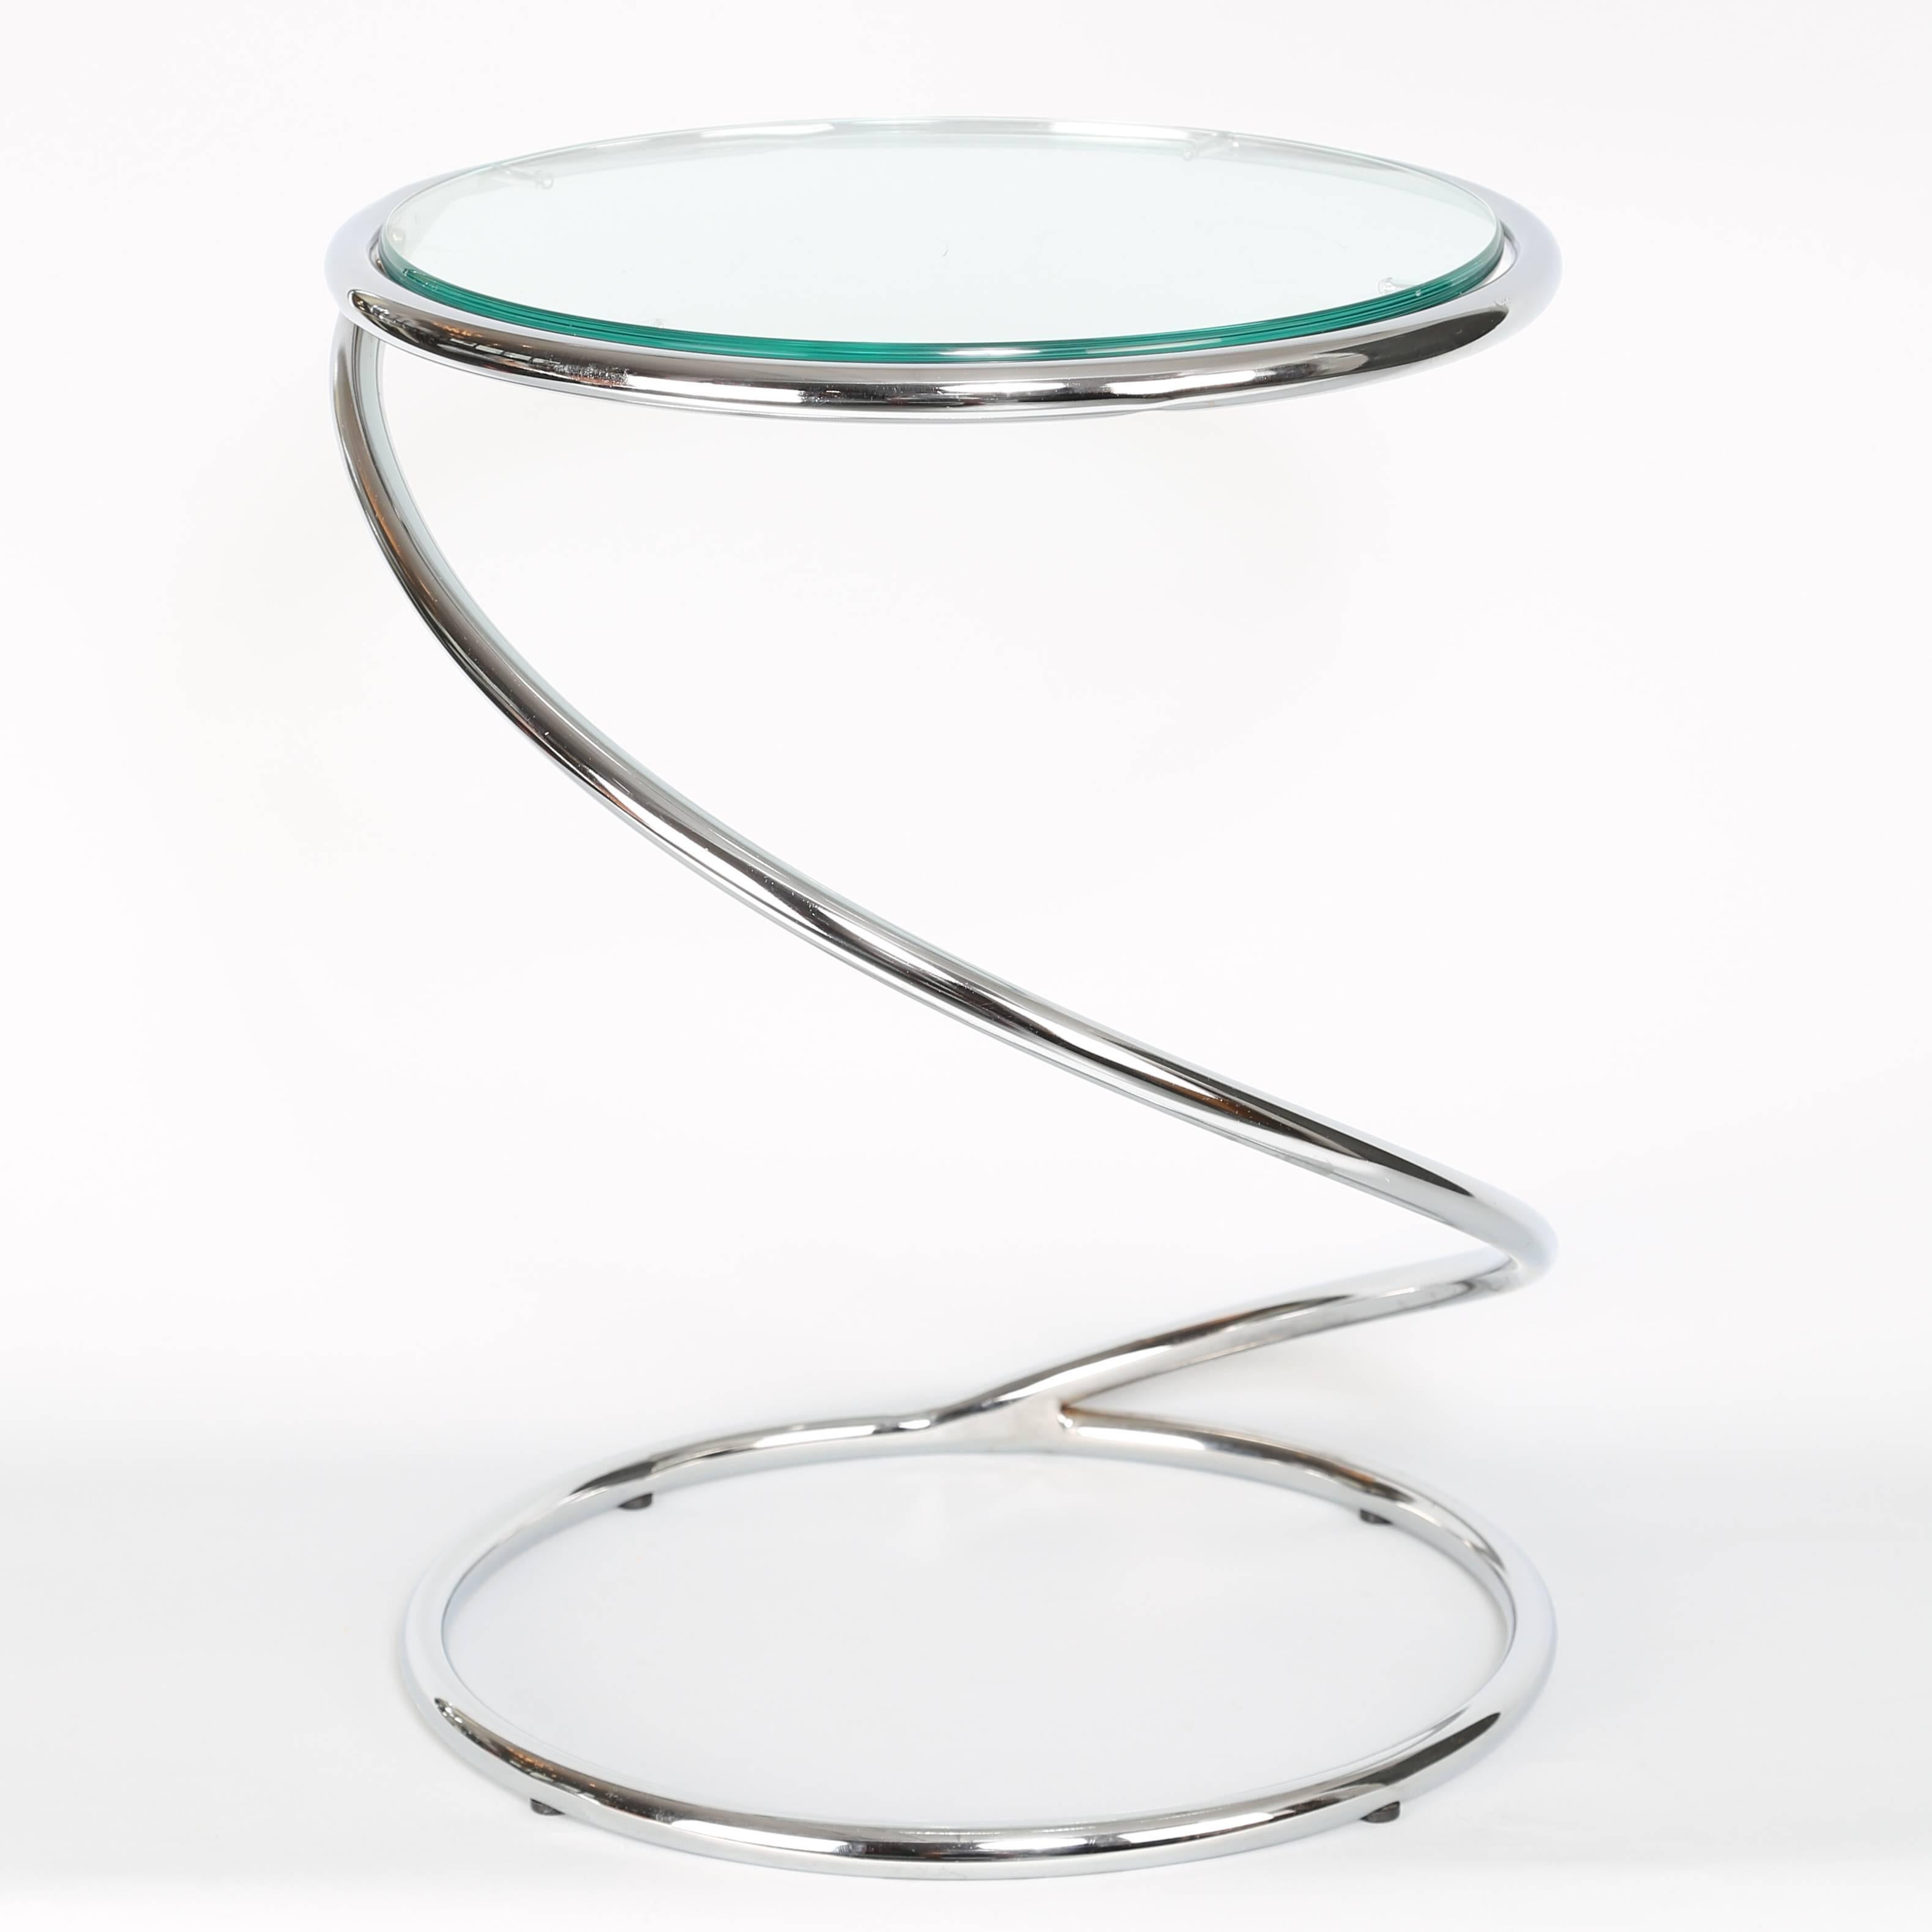 Fun 1970s chrome side table in the form of a spring, by Pace Collection. Half-inch thick glass rests in circular top. 


